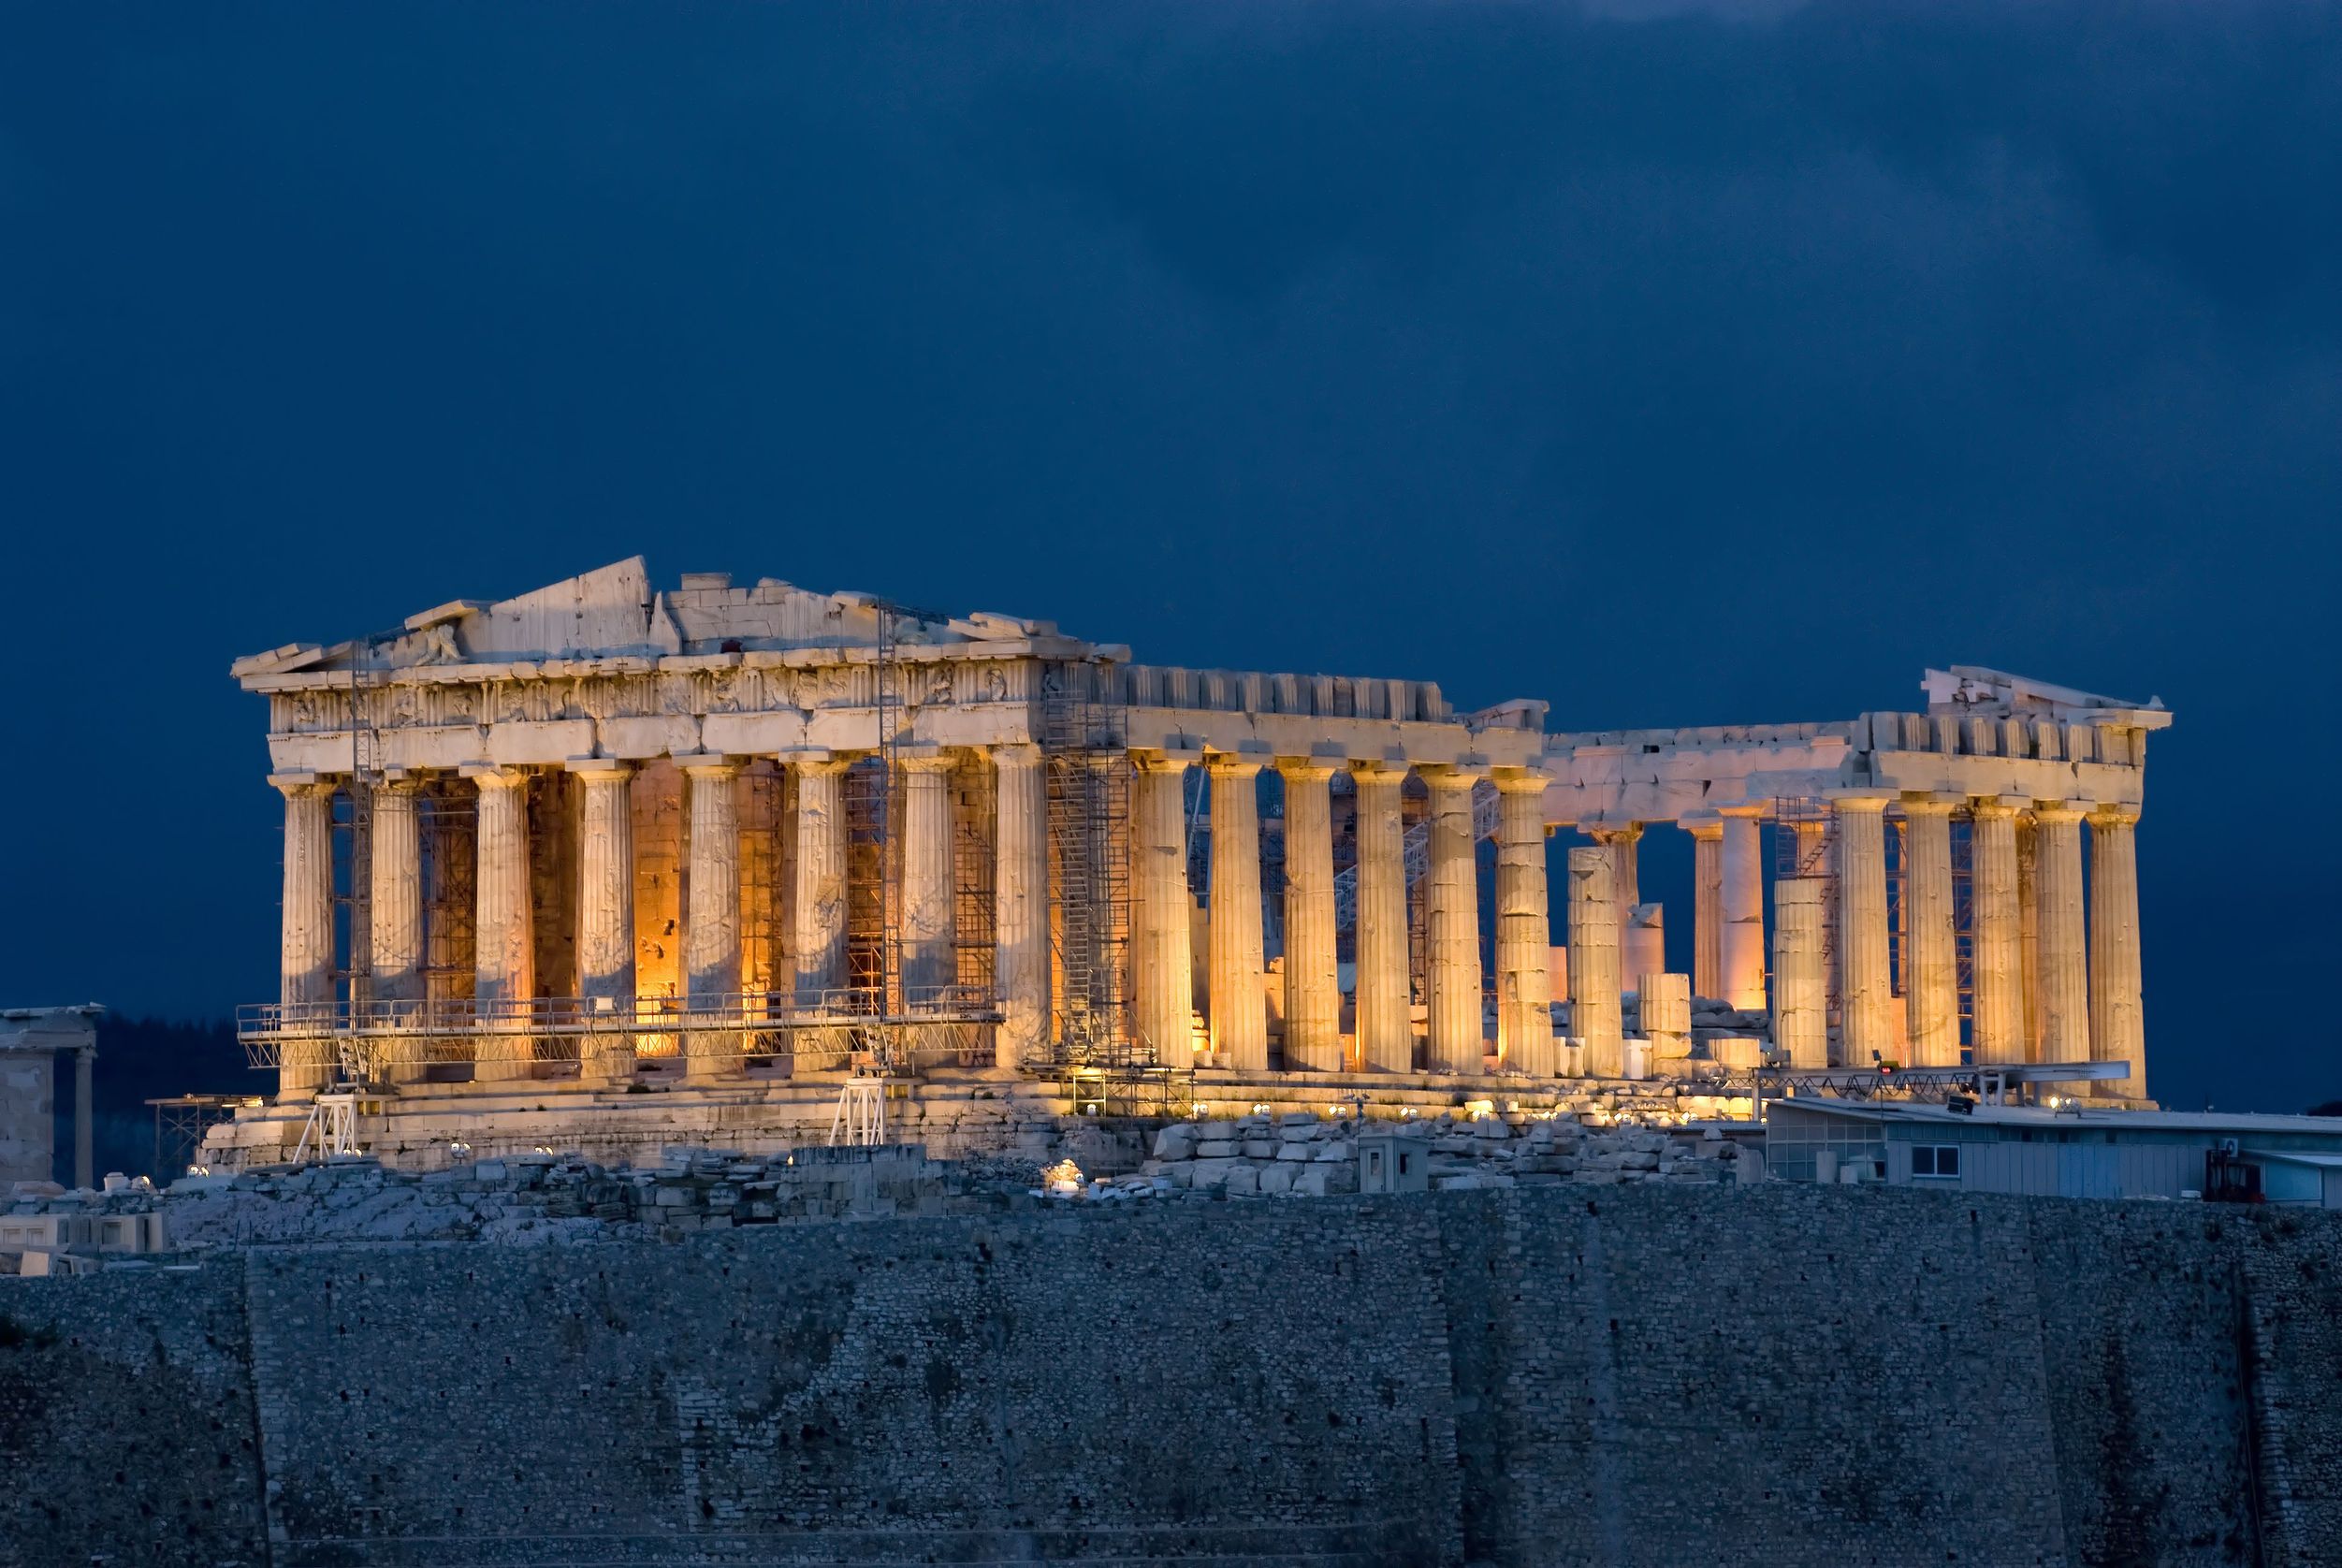 Evening view of the brightly lit Parthenon.